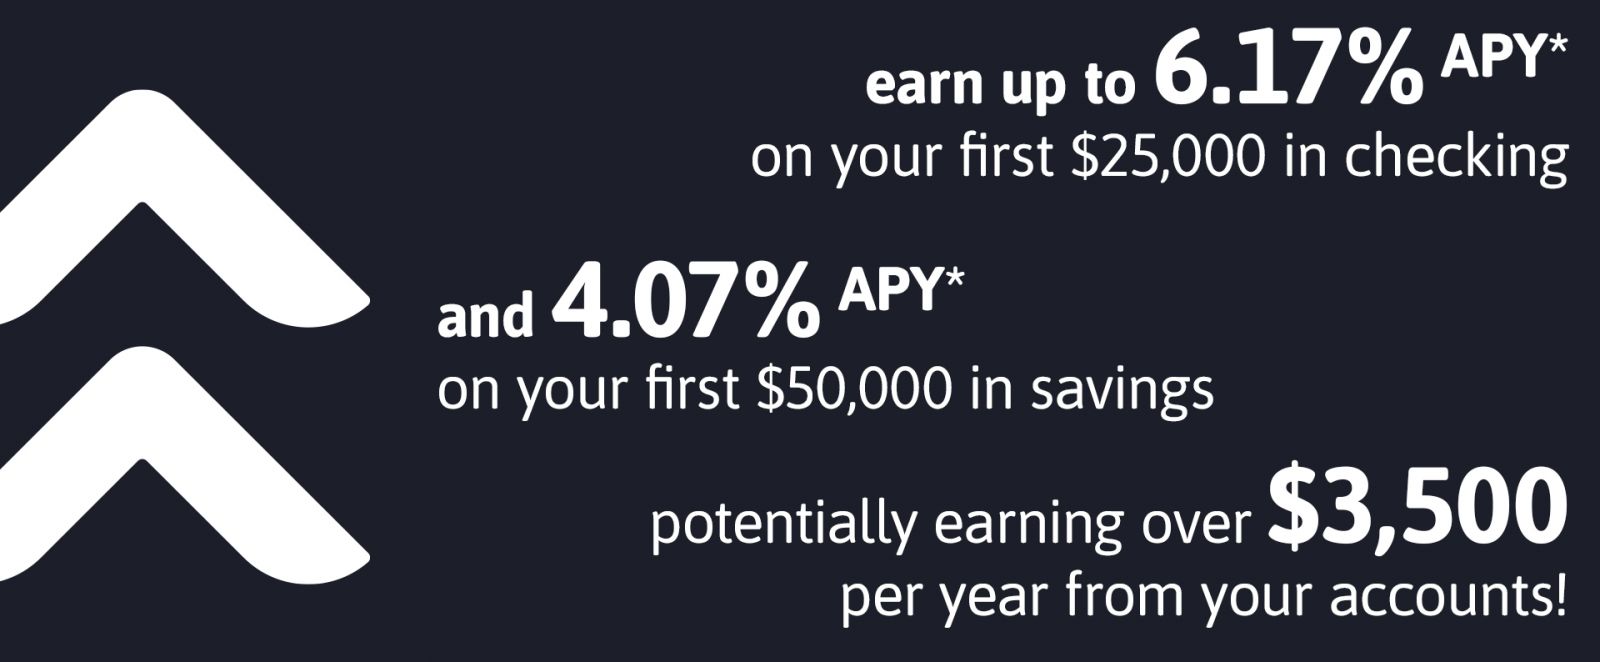 potentially earn over $3,500 per year from your check and savings account